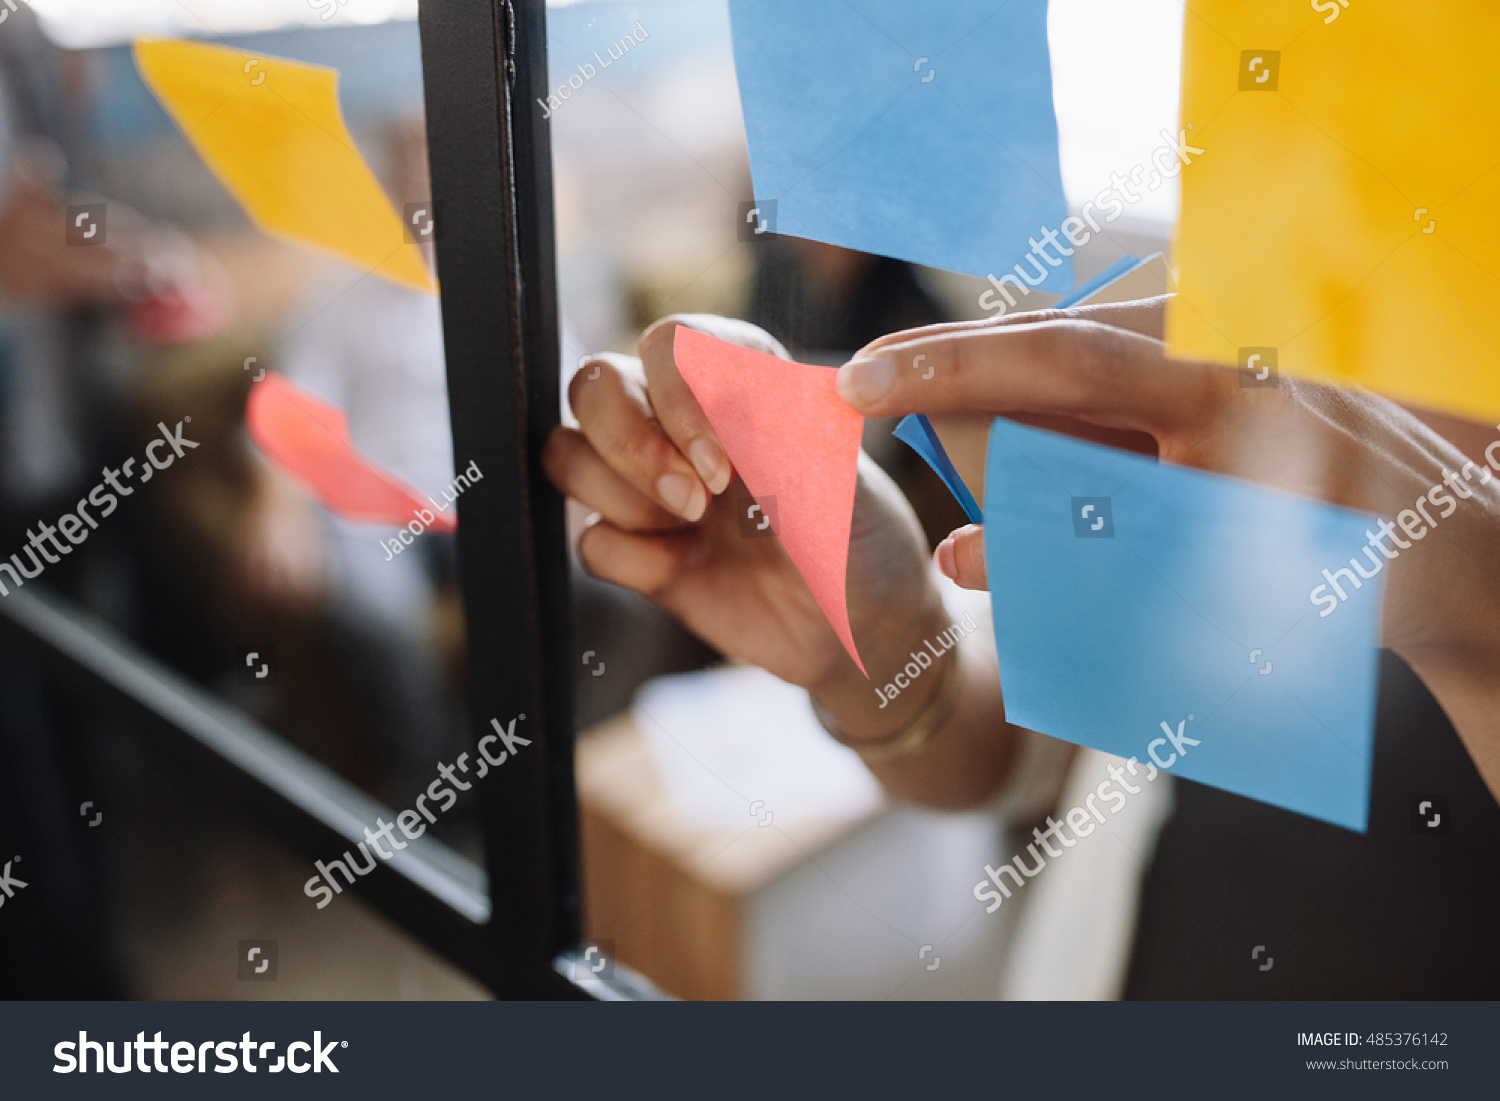 Close up shot of hands of woman sticking adhesive notes on glass wall in office #485376142